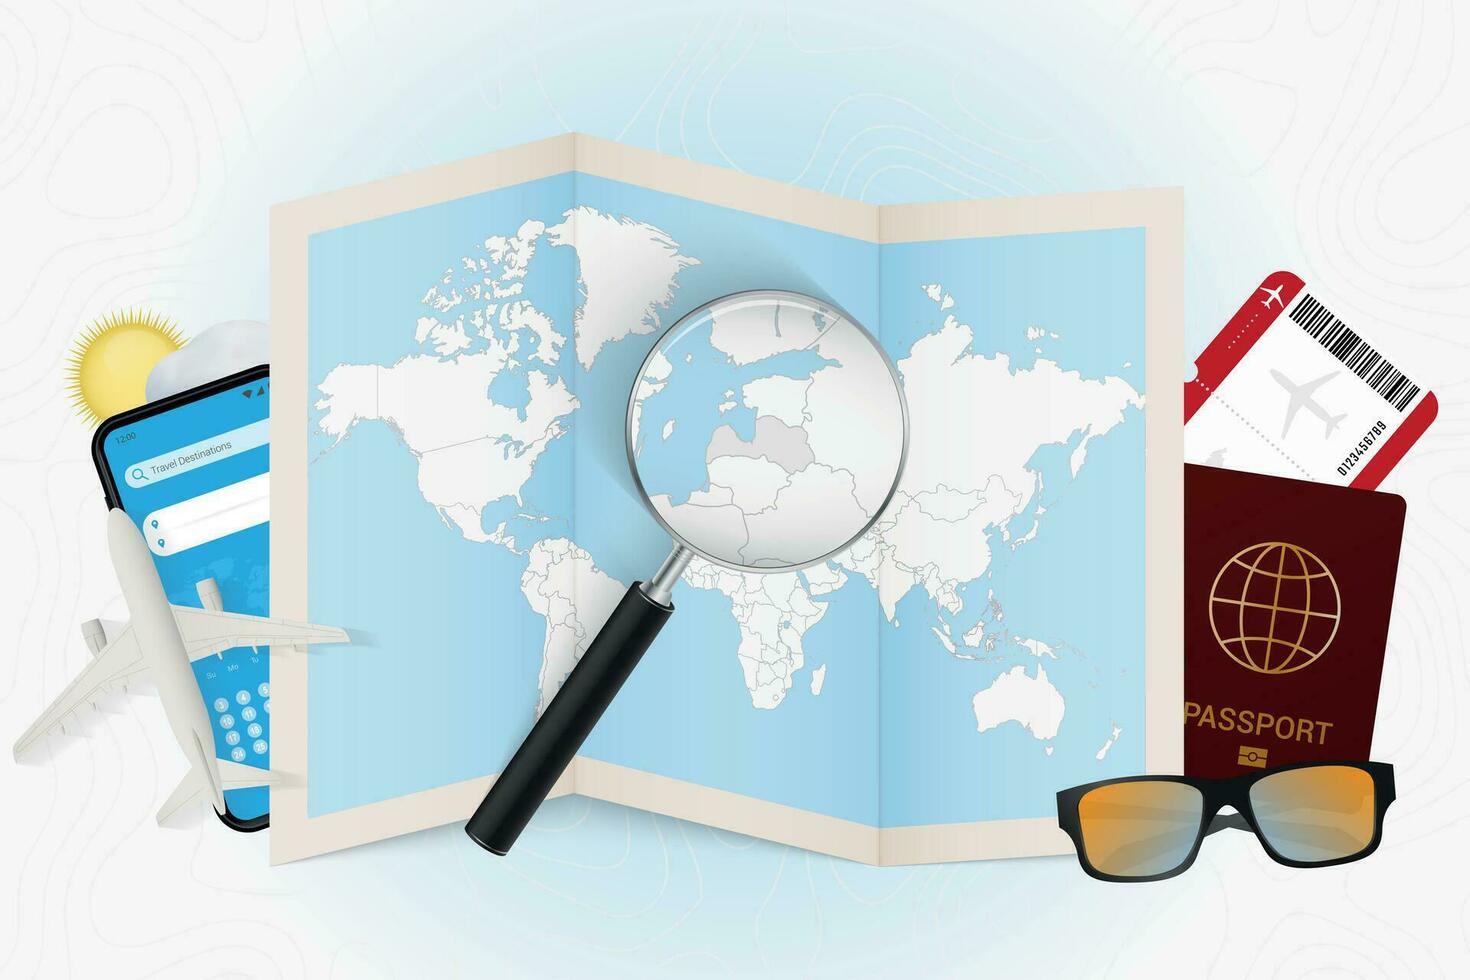 Travel destination Latvia, tourism mockup with travel equipment and world map with magnifying glass on a Latvia. vector